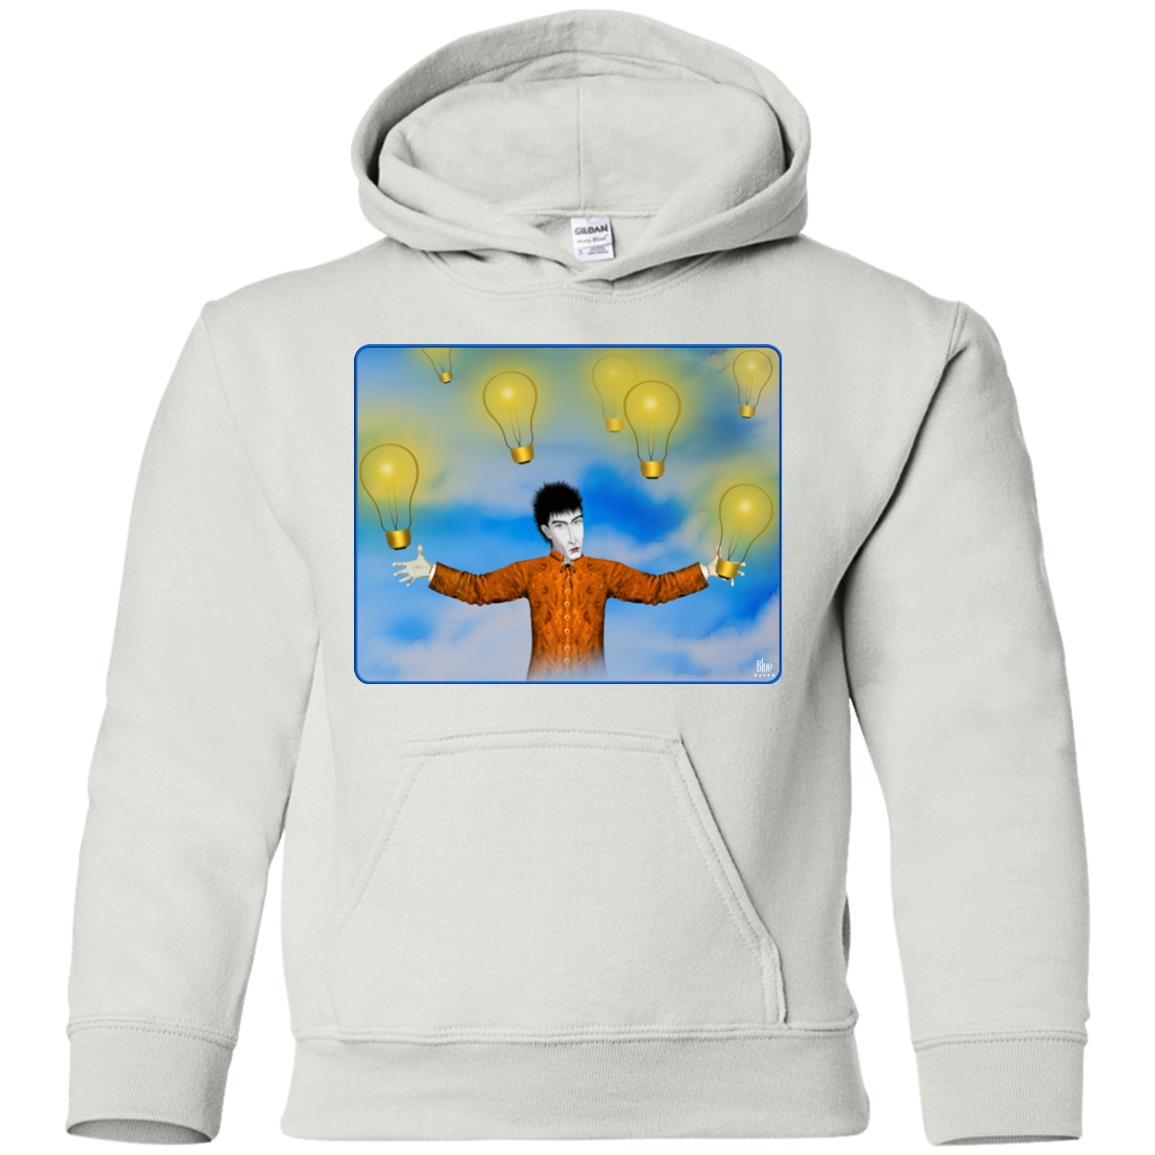 ideas will come - Youth Hoodie